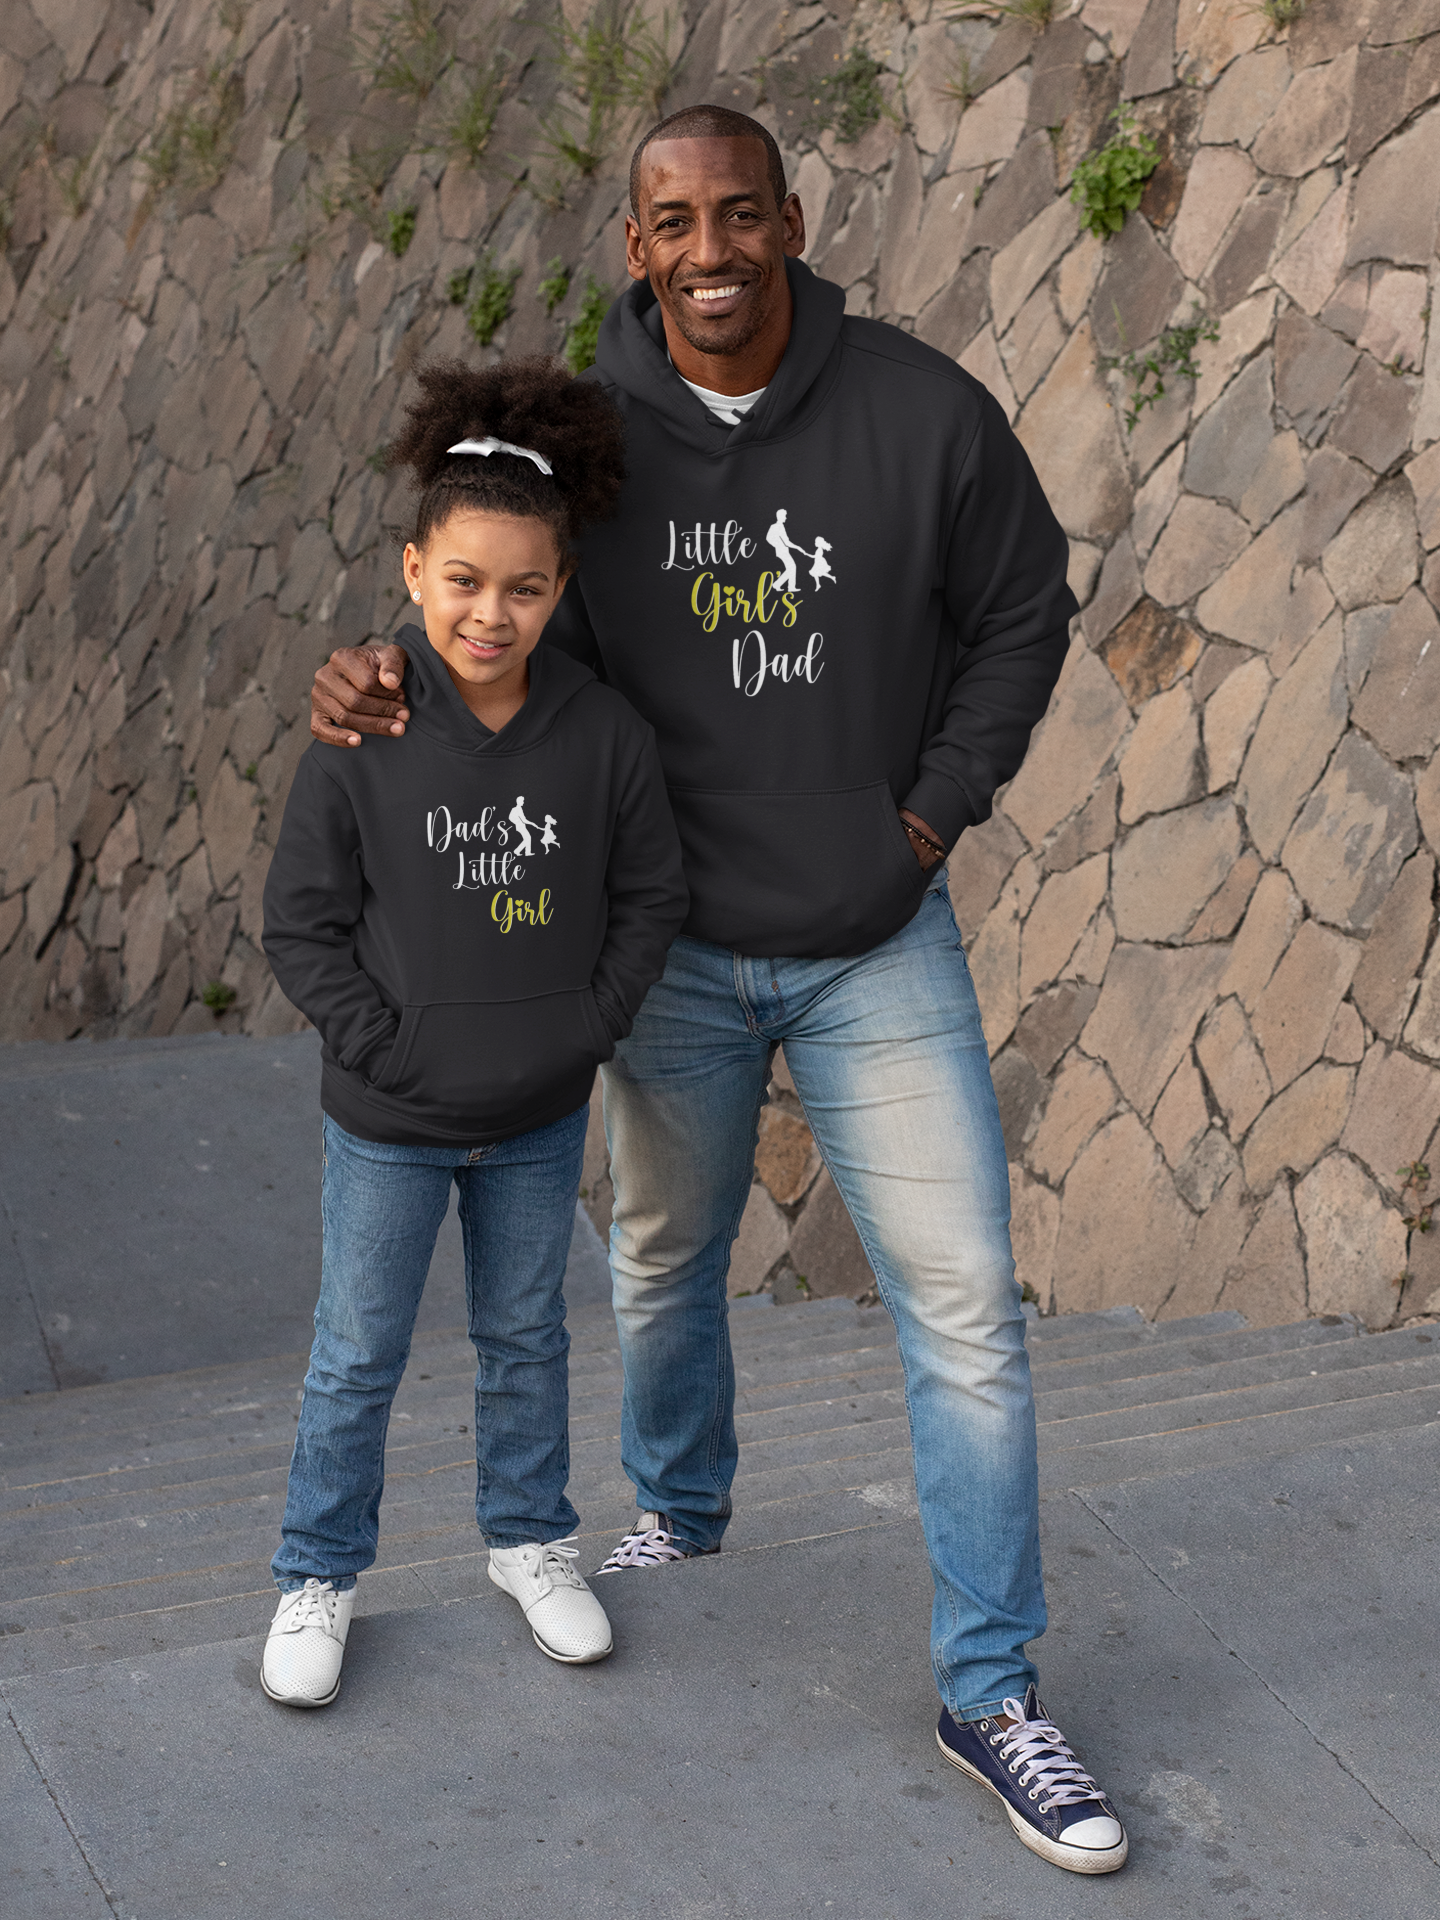 Little Girls Dad Father and Daughter Black Matching Hoodies- FunkyTradition